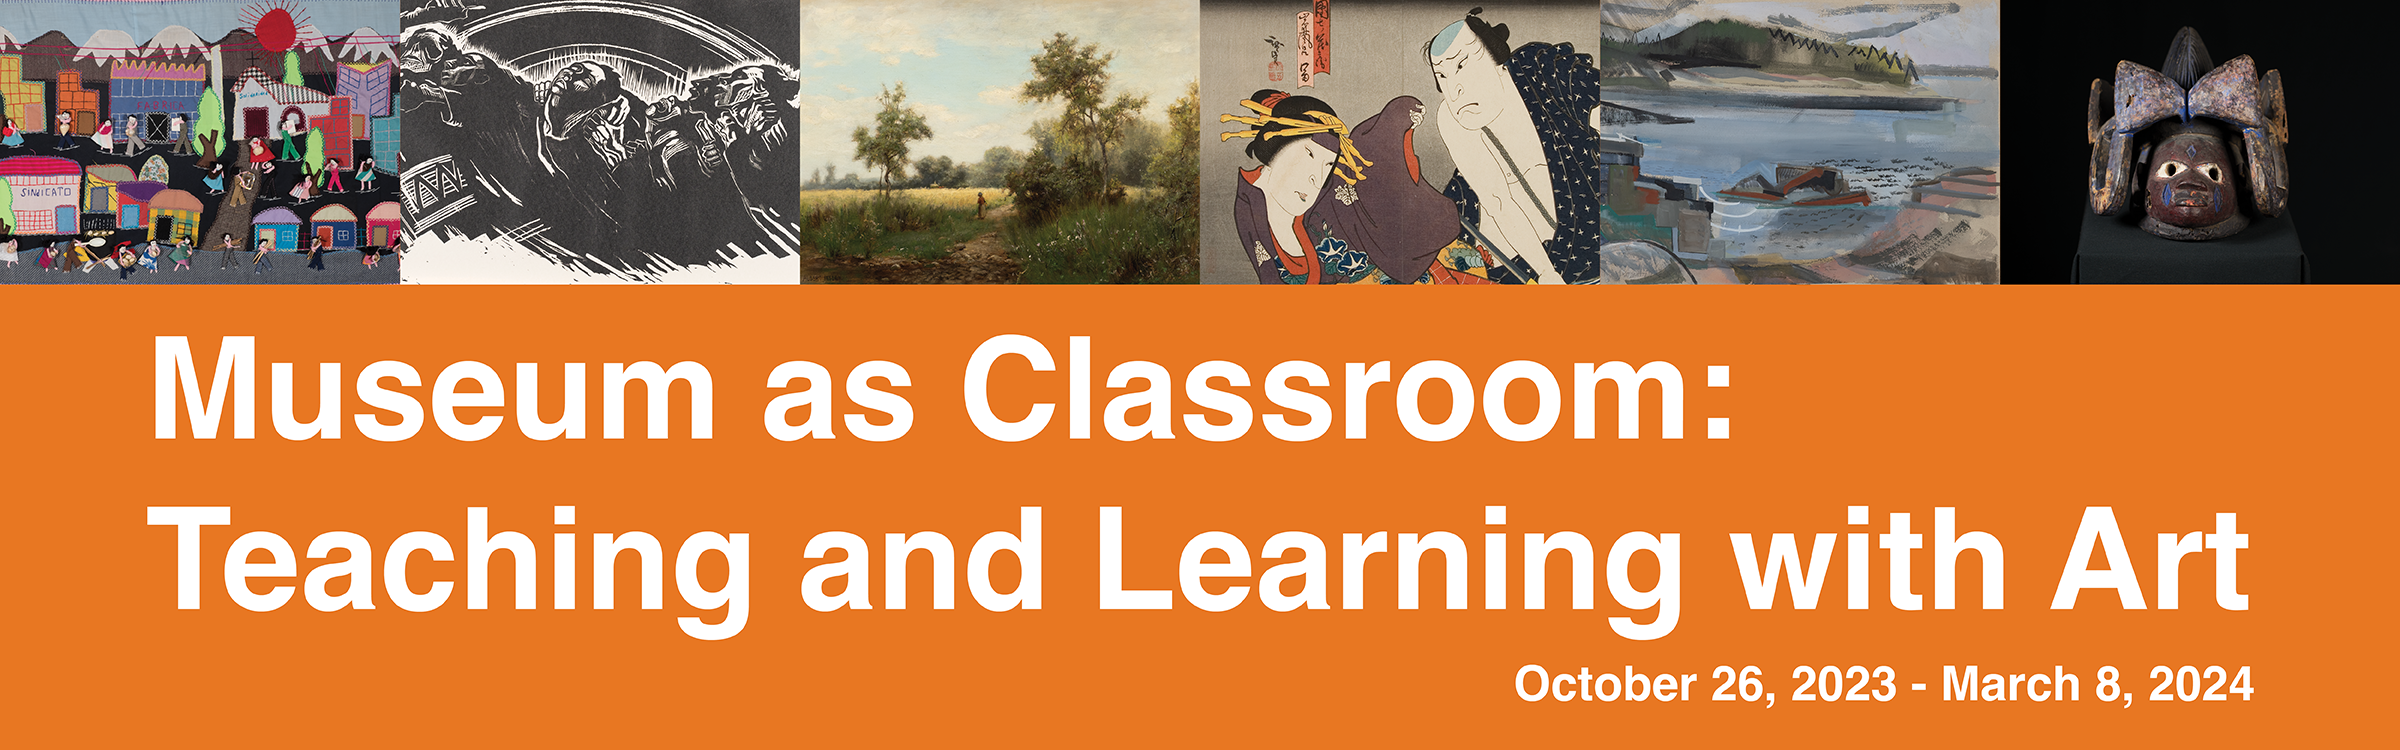 Museum as Classroom Banner